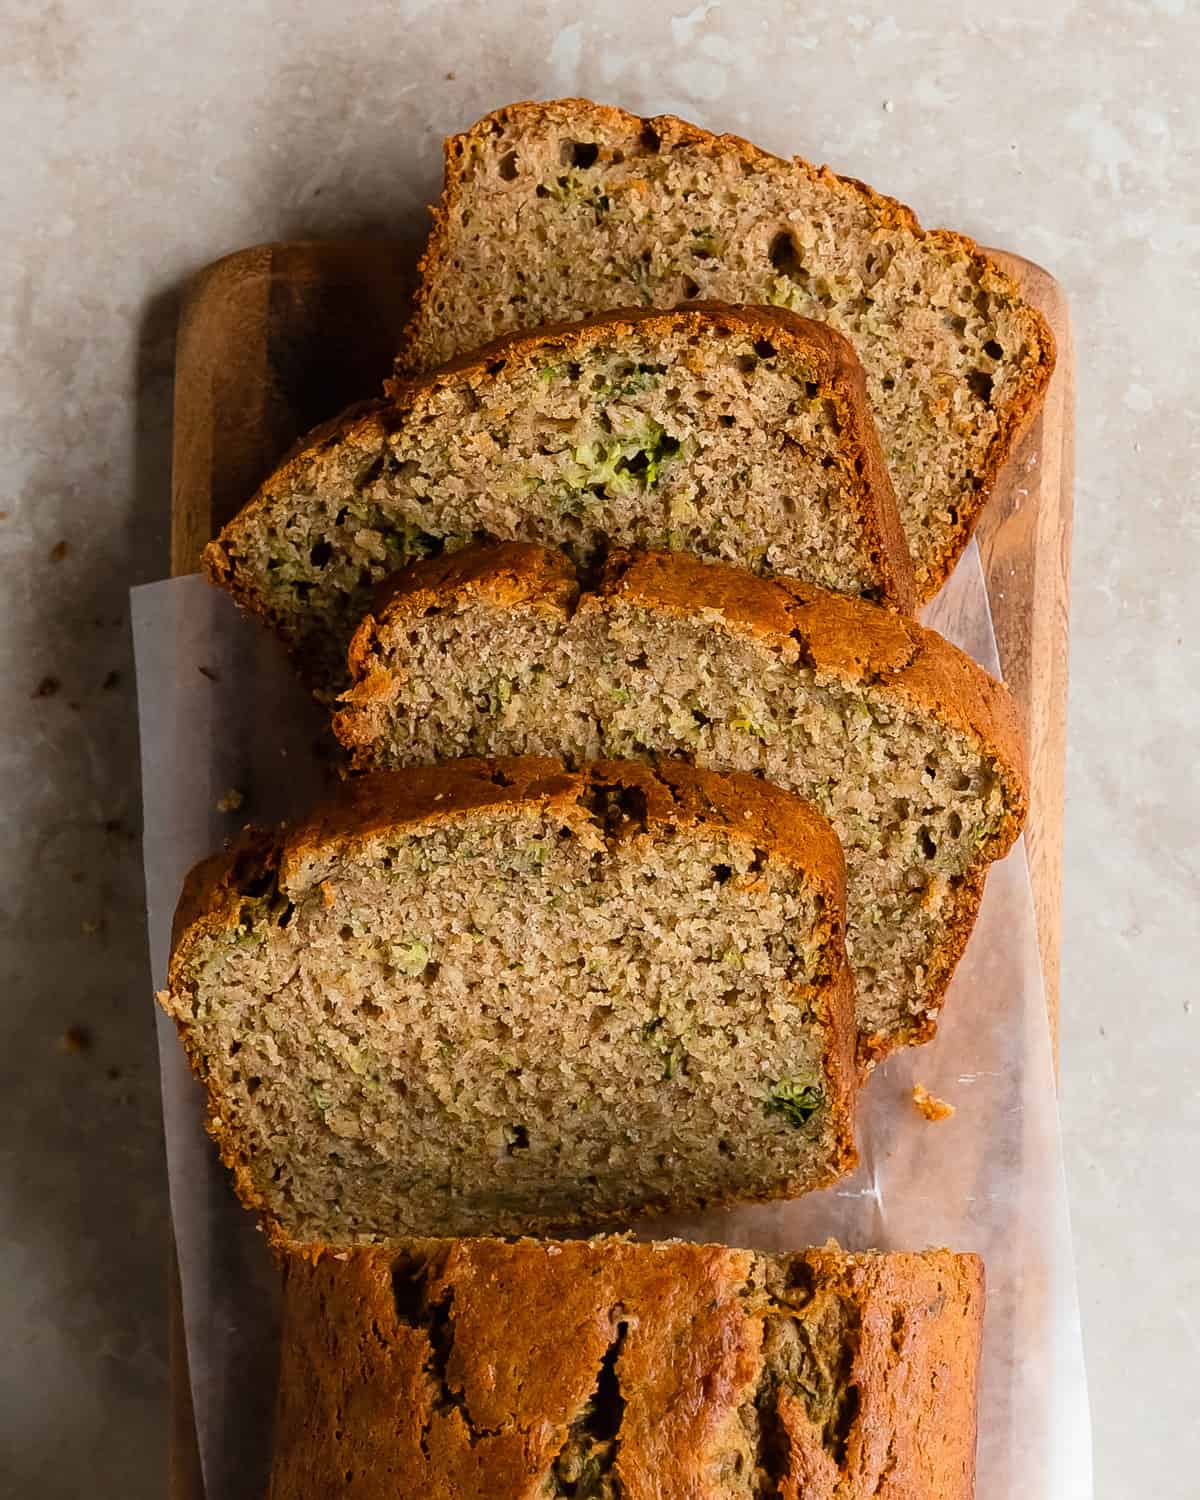 Banana zucchini bread is a sweet and cozy, cinnamon spiced banana bread filled with shredded zucchini. This zucchini banana bread recipe is quick and easy to make and is the perfect breakfast or snack everyone will love. 